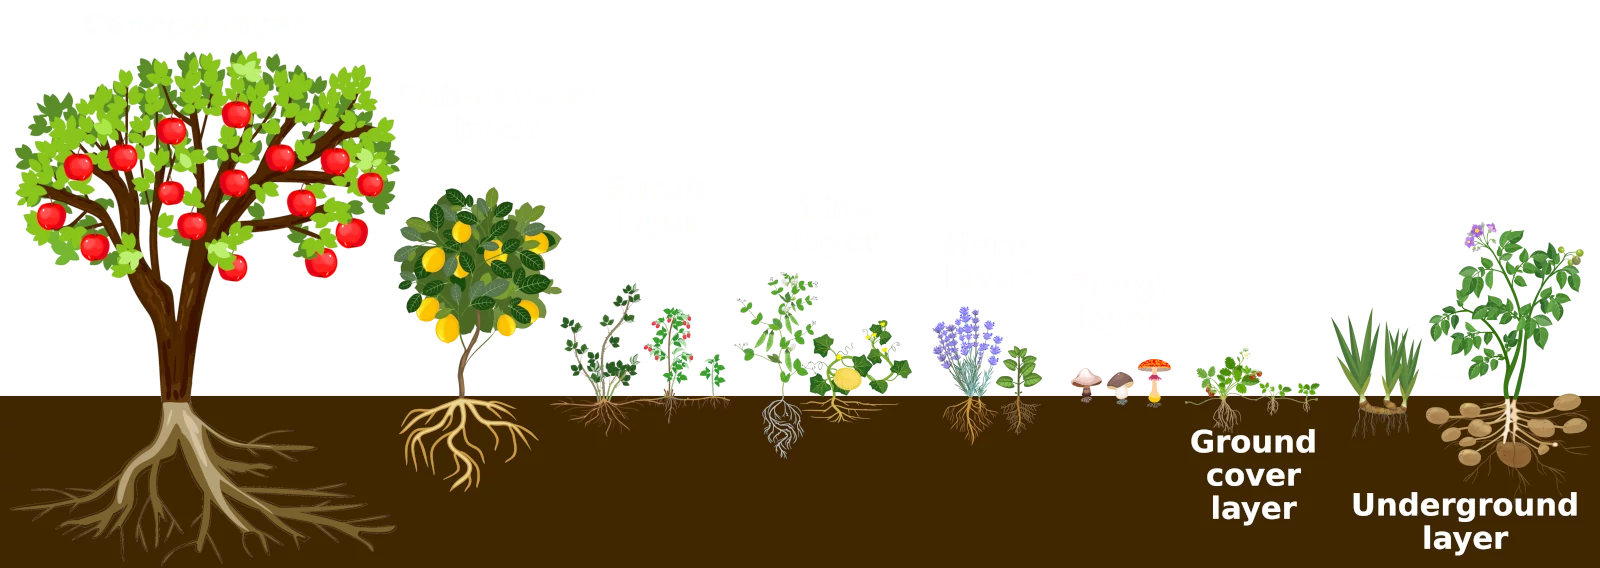 8 layers of edible perennials in food forest